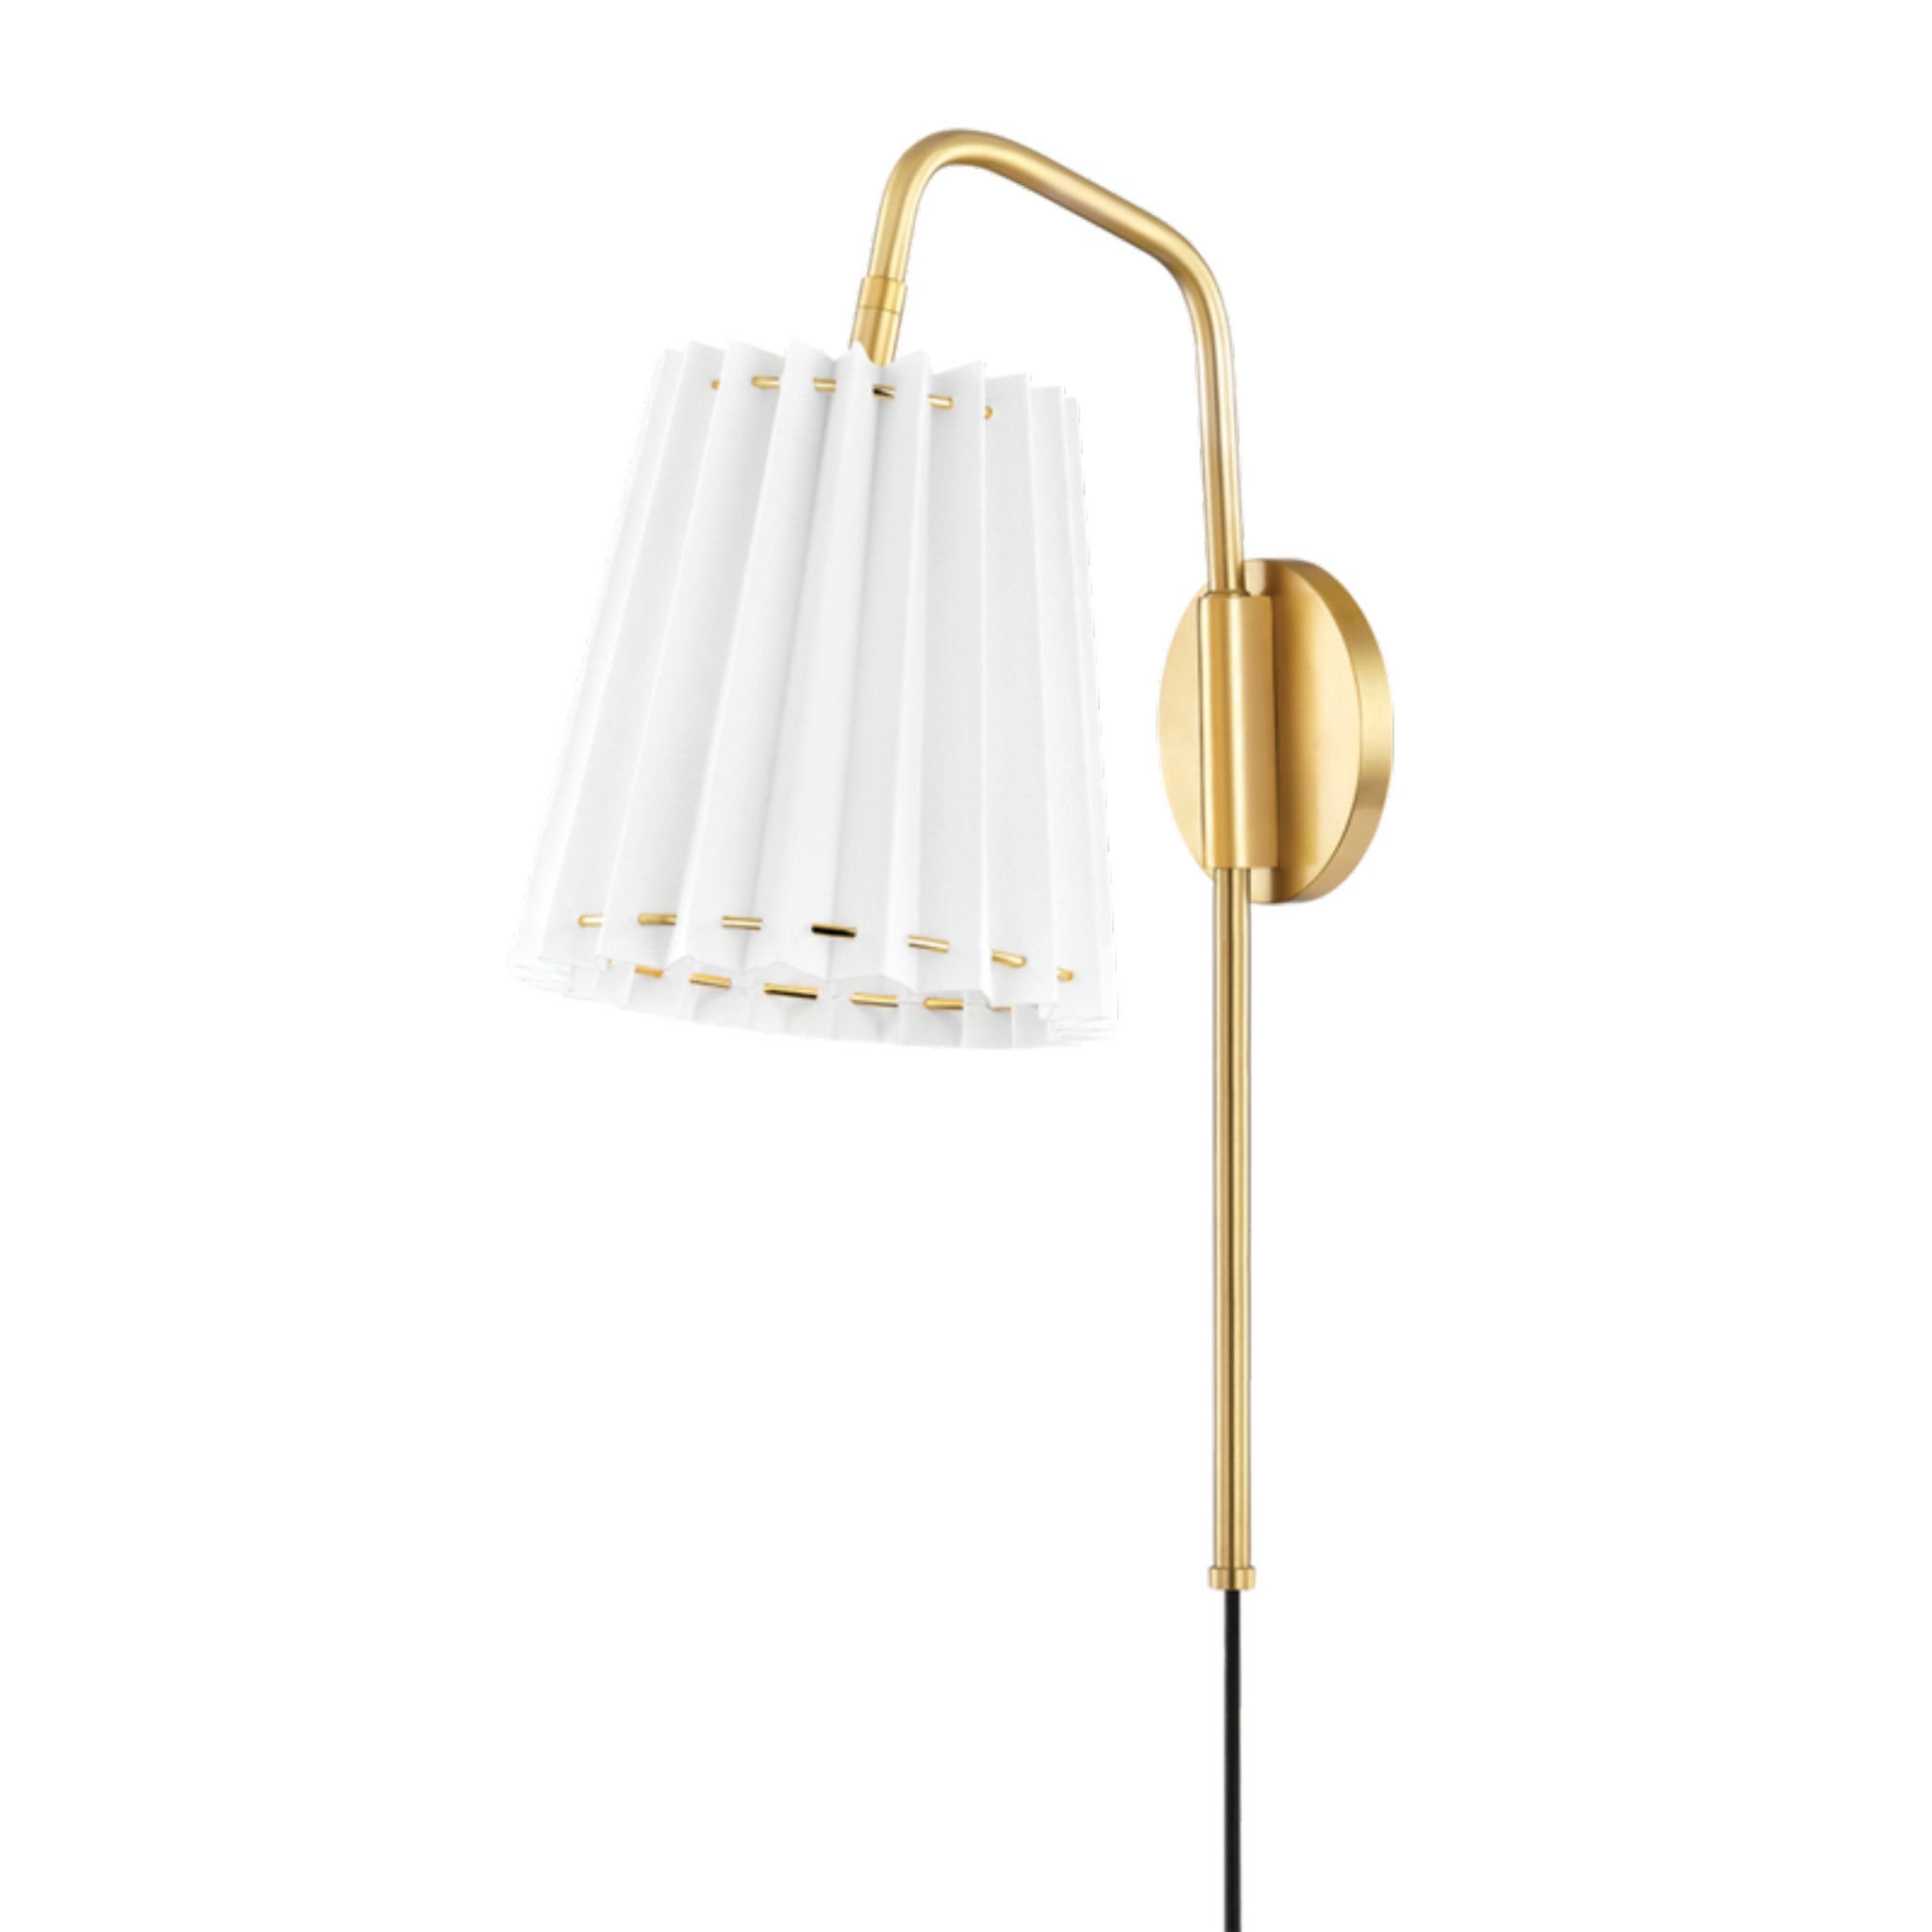 Demi 1 Light Plug-in Sconce in Aged Brass